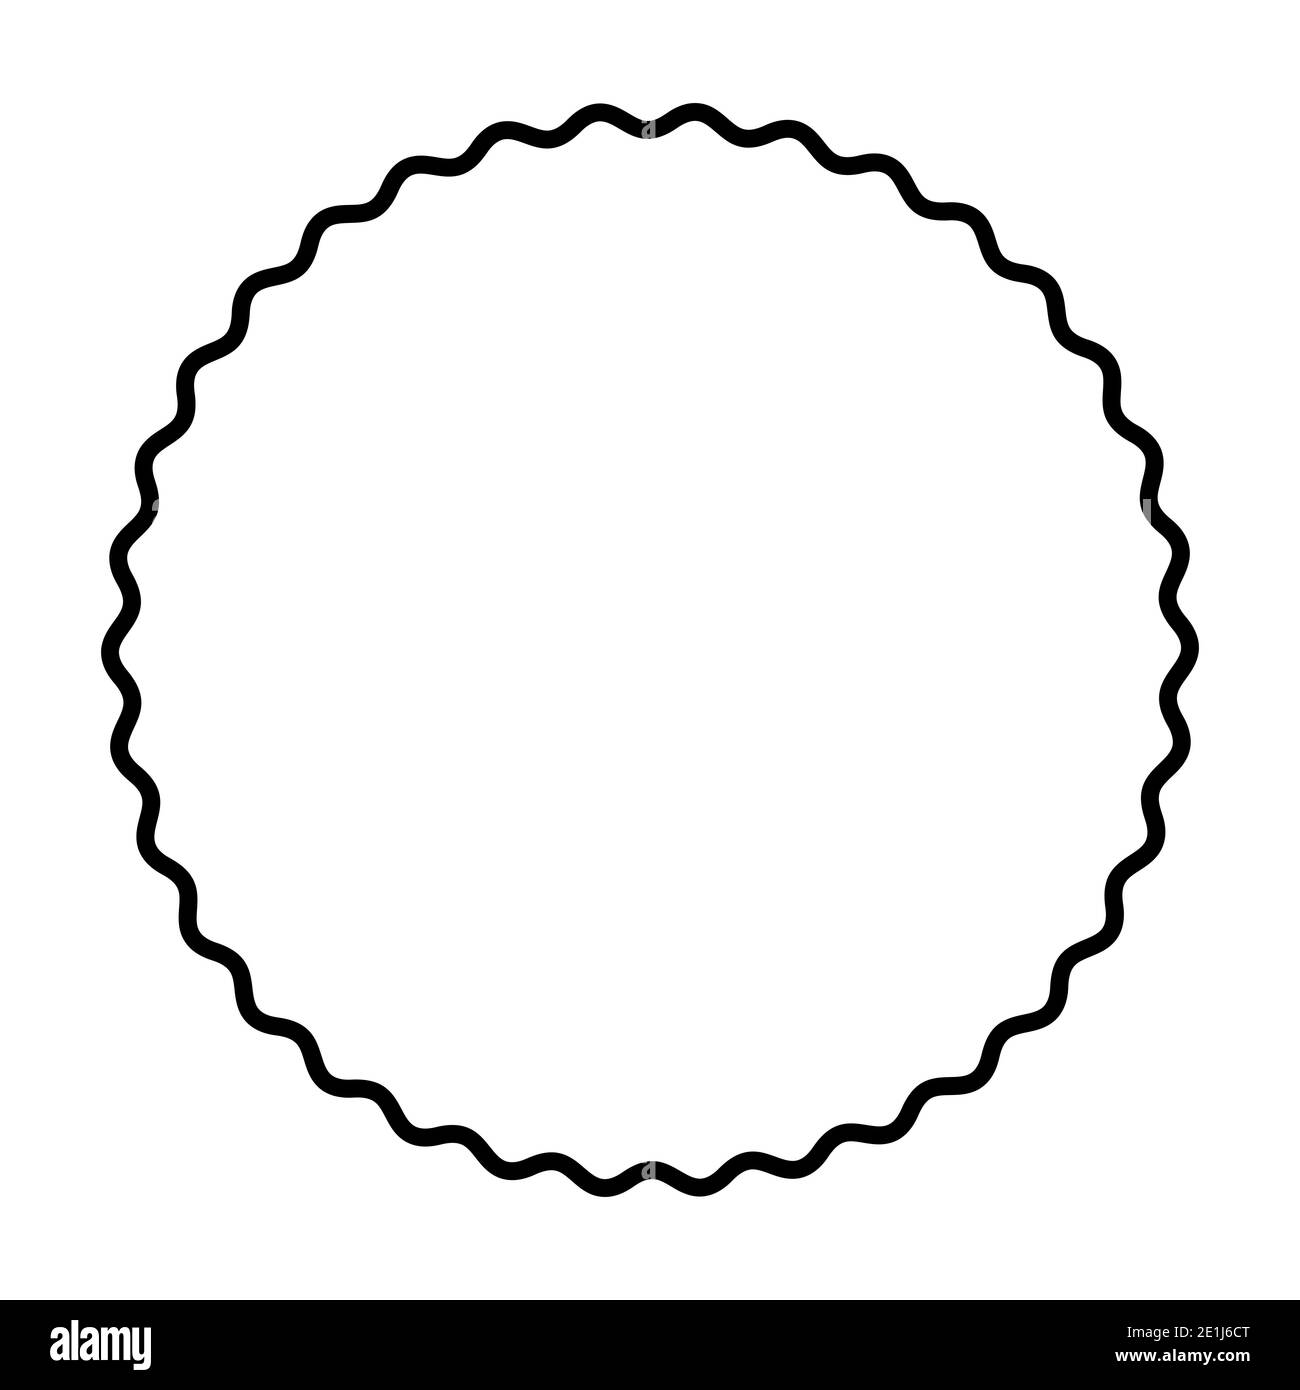 One bold wavy line forming a black circle frame. Circle frame, made by a black serpentine line. Snake-like circular frame, a decorative surround. Stock Photo